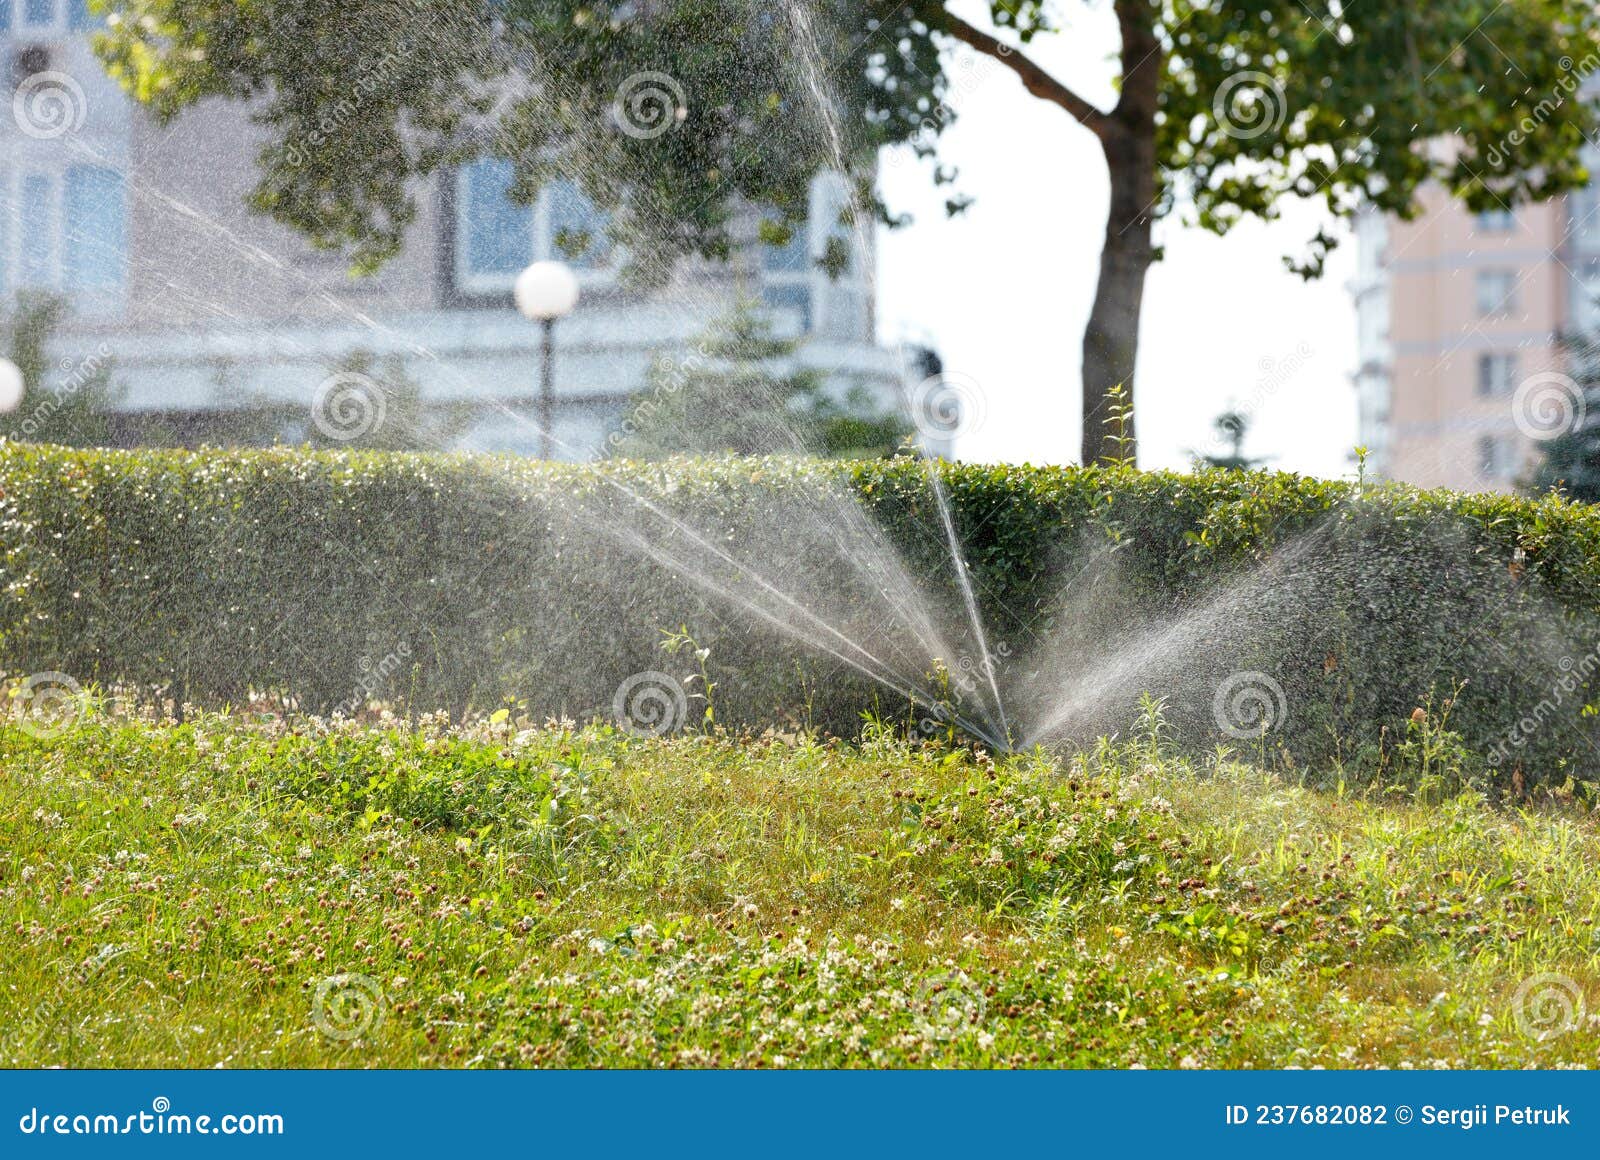 an automatic irrigation system irrigates the green lawn in the young garden of the city park